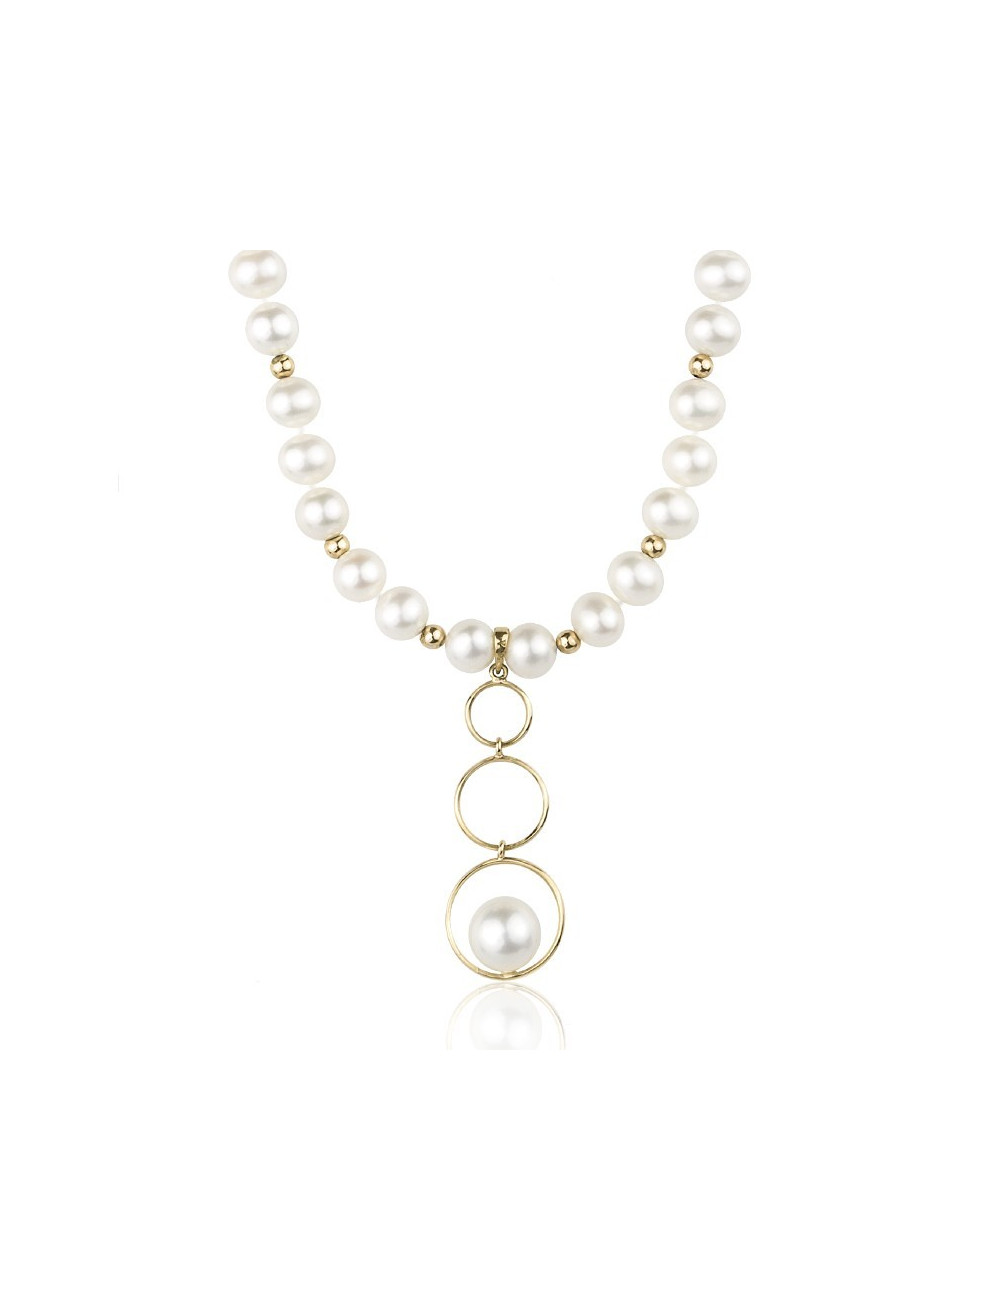 Necklace of slightly oval white pearls with gold balls and a pendant composed of three circles N67FP01058+kuG3